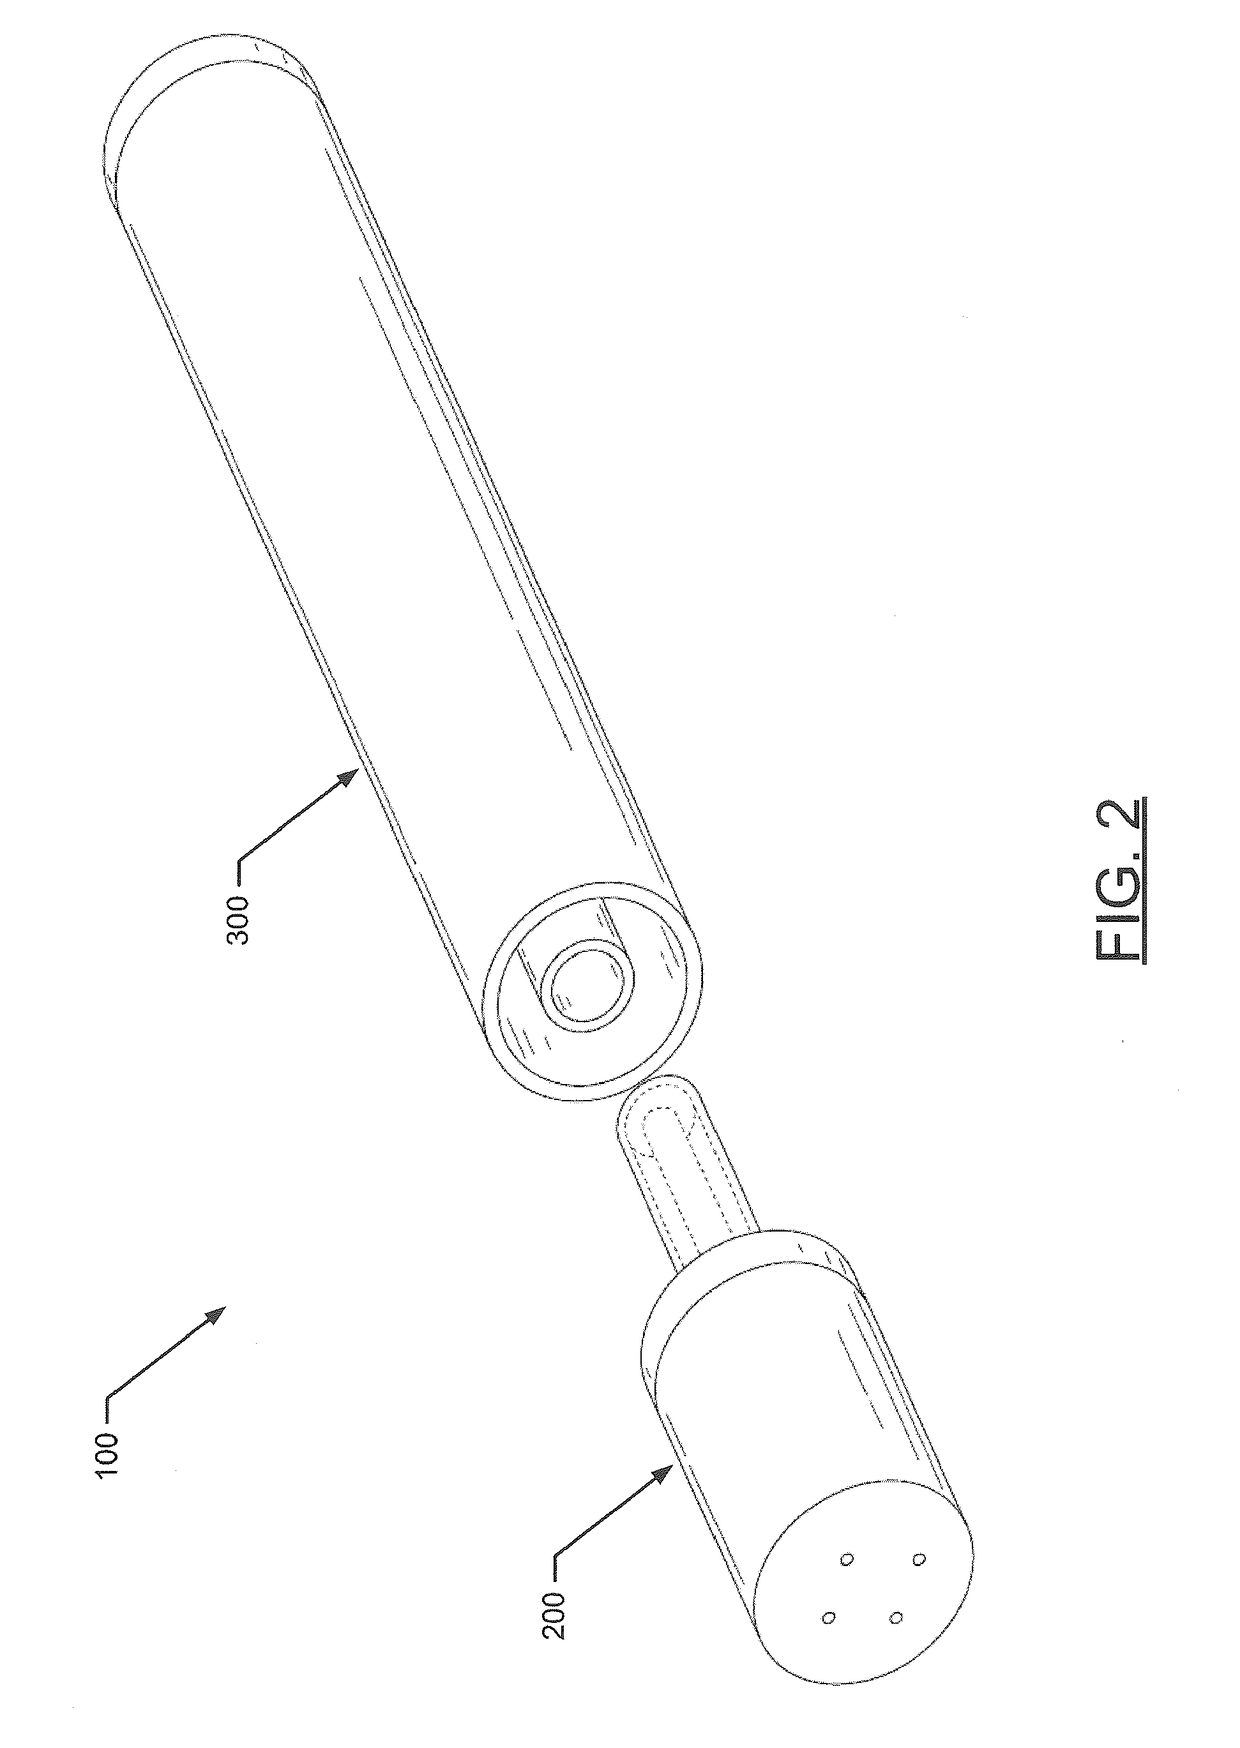 Aerosol delivery device including a wirelessly-heated atomizer and related method